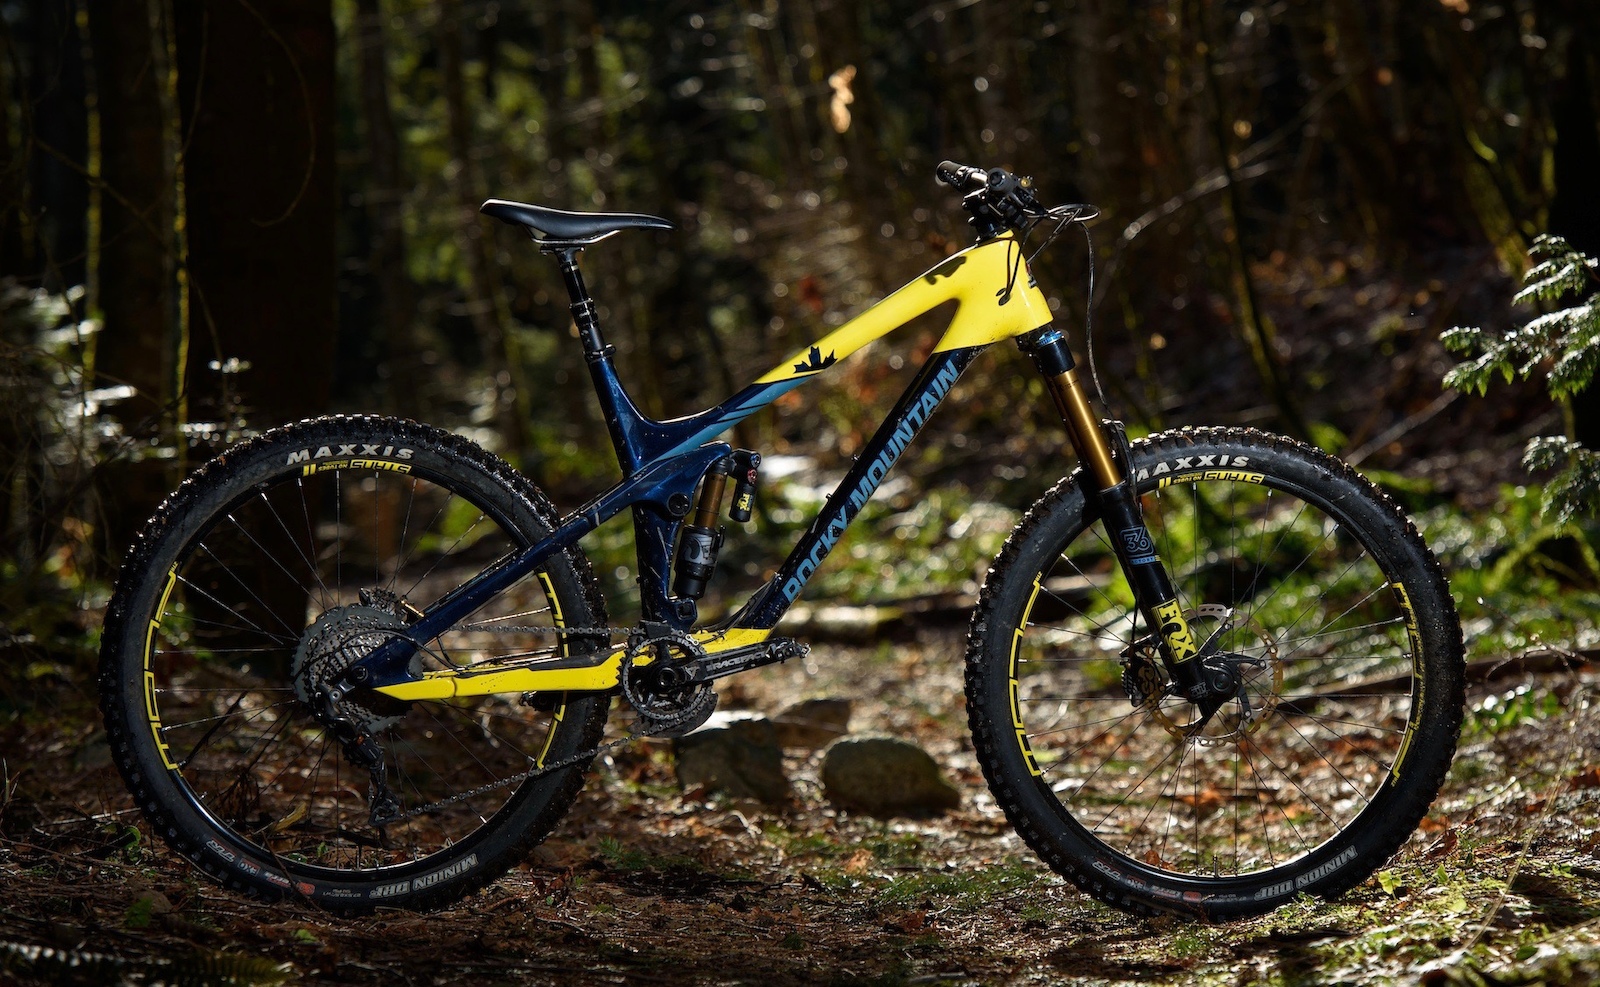 Rocky Mountain Slayer 790 MSL - Review - Pinkbike